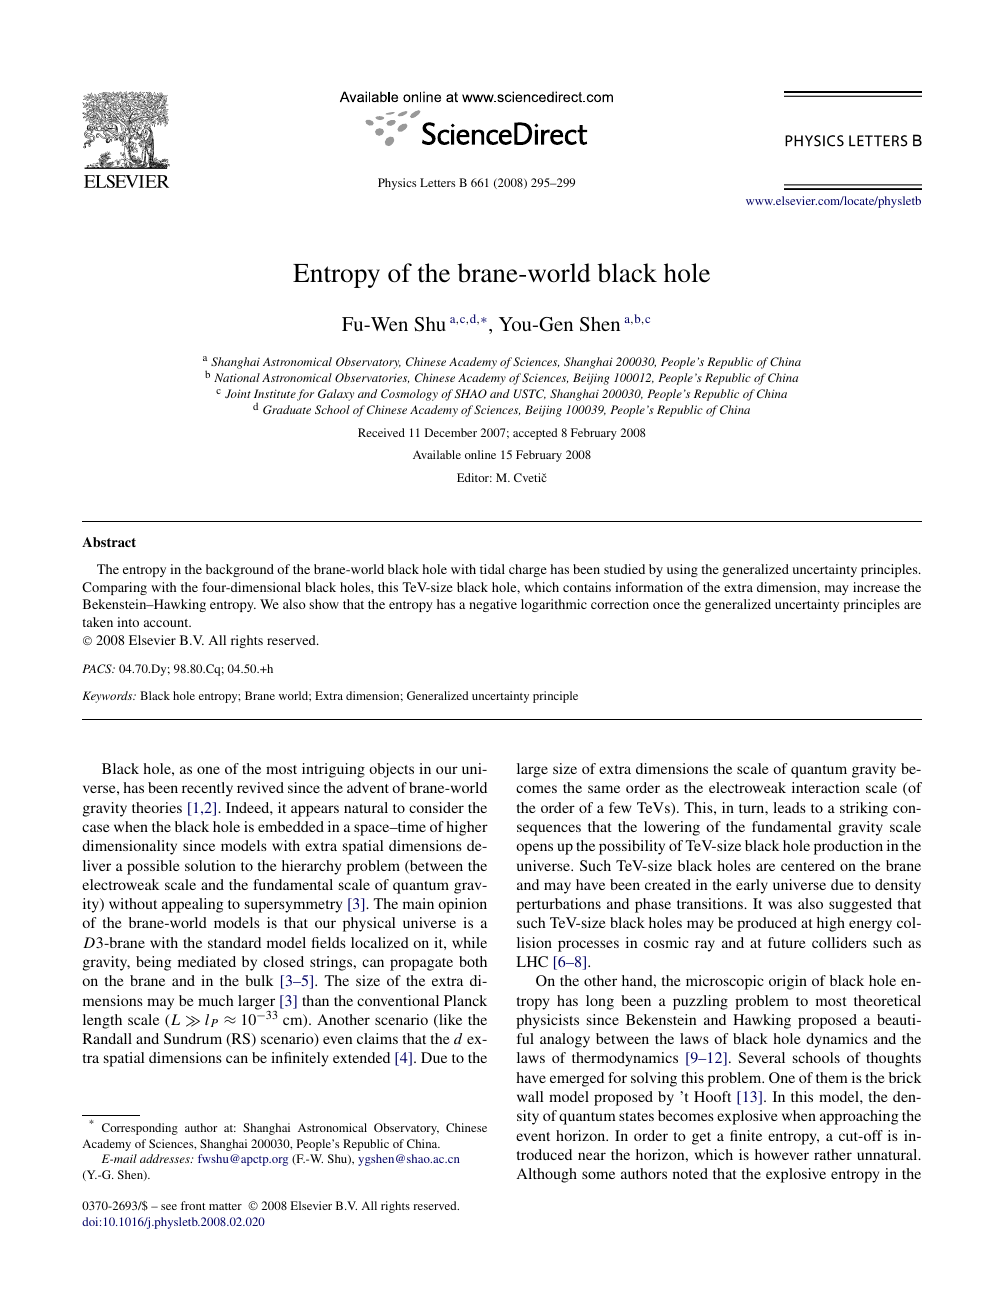 Entropy Of The Brane World Black Hole Topic Of Research Paper In Physical Sciences Download Scholarly Article Pdf And Read For Free On Cyberleninka Open Science Hub